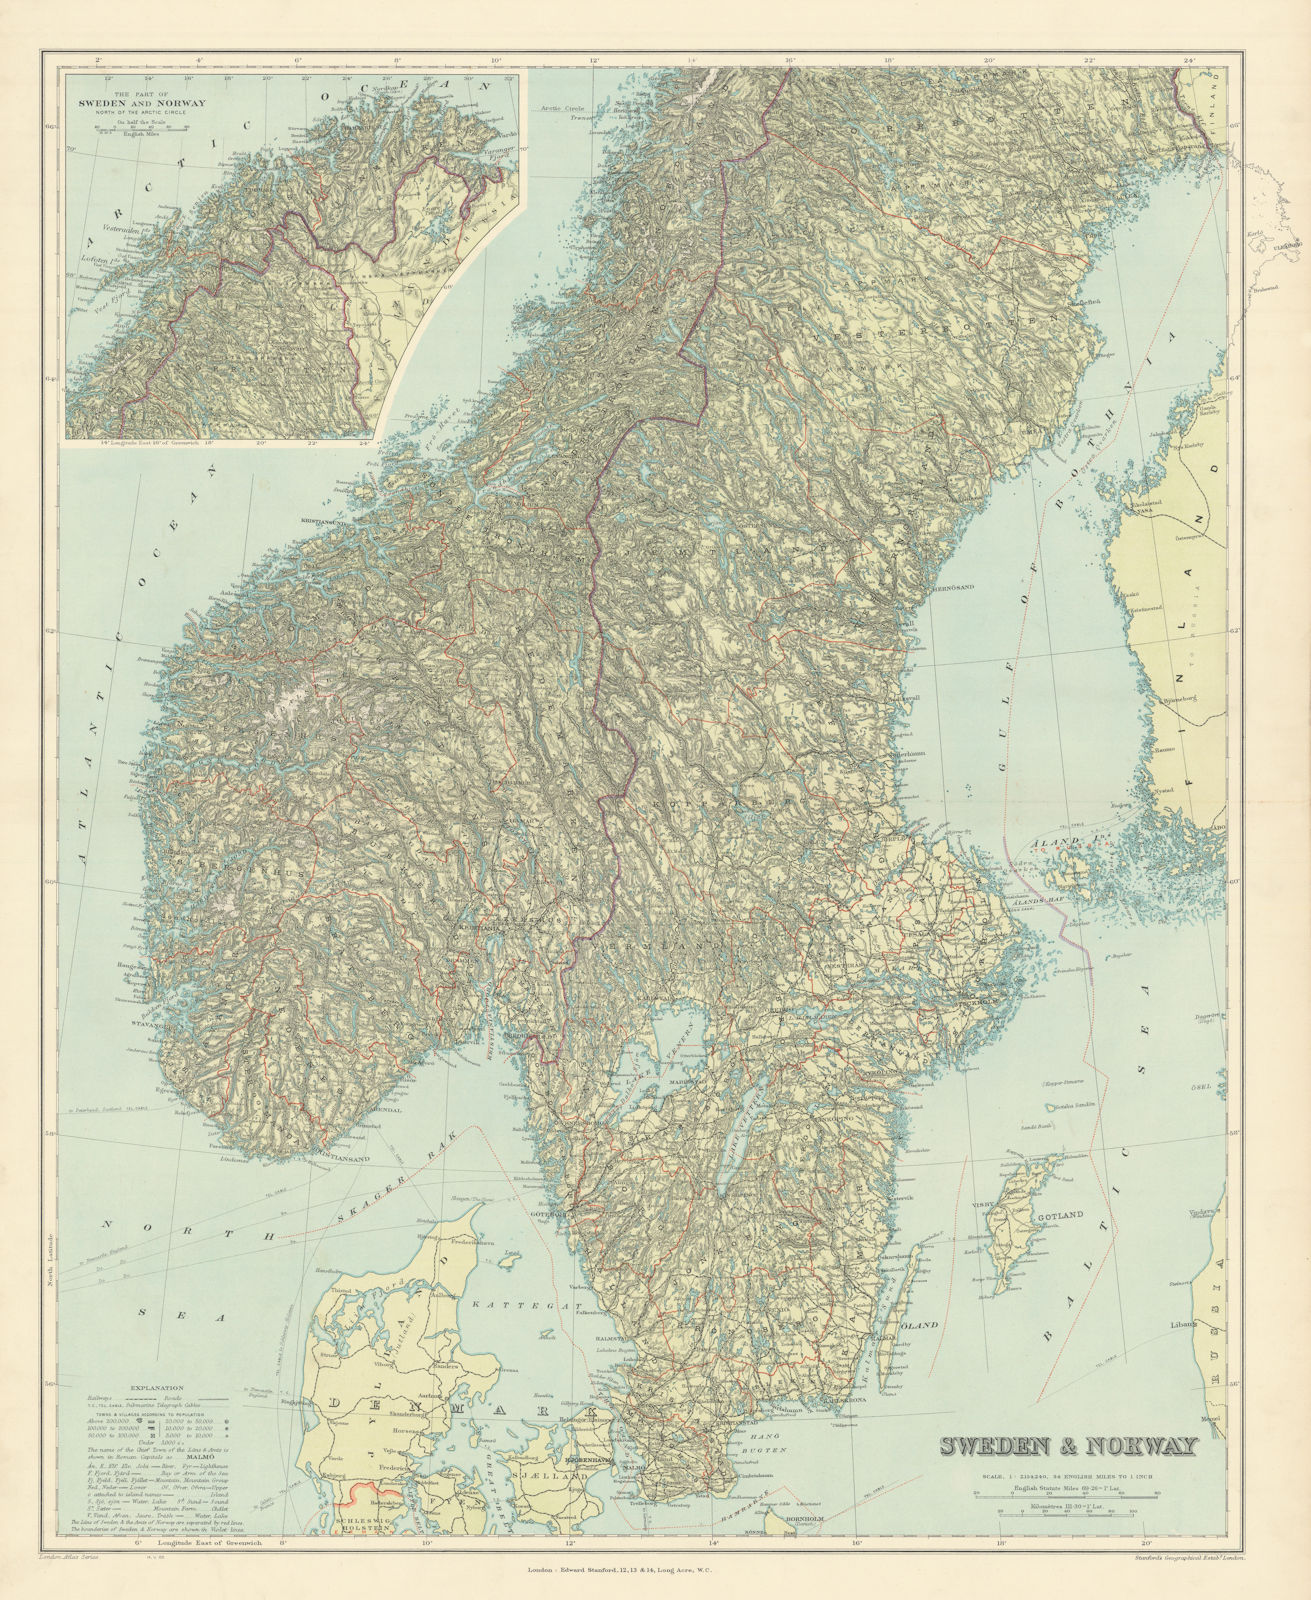 Scandinavia physical mountains fjords glaciers. Sweden Norway. STANFORD 1904 map